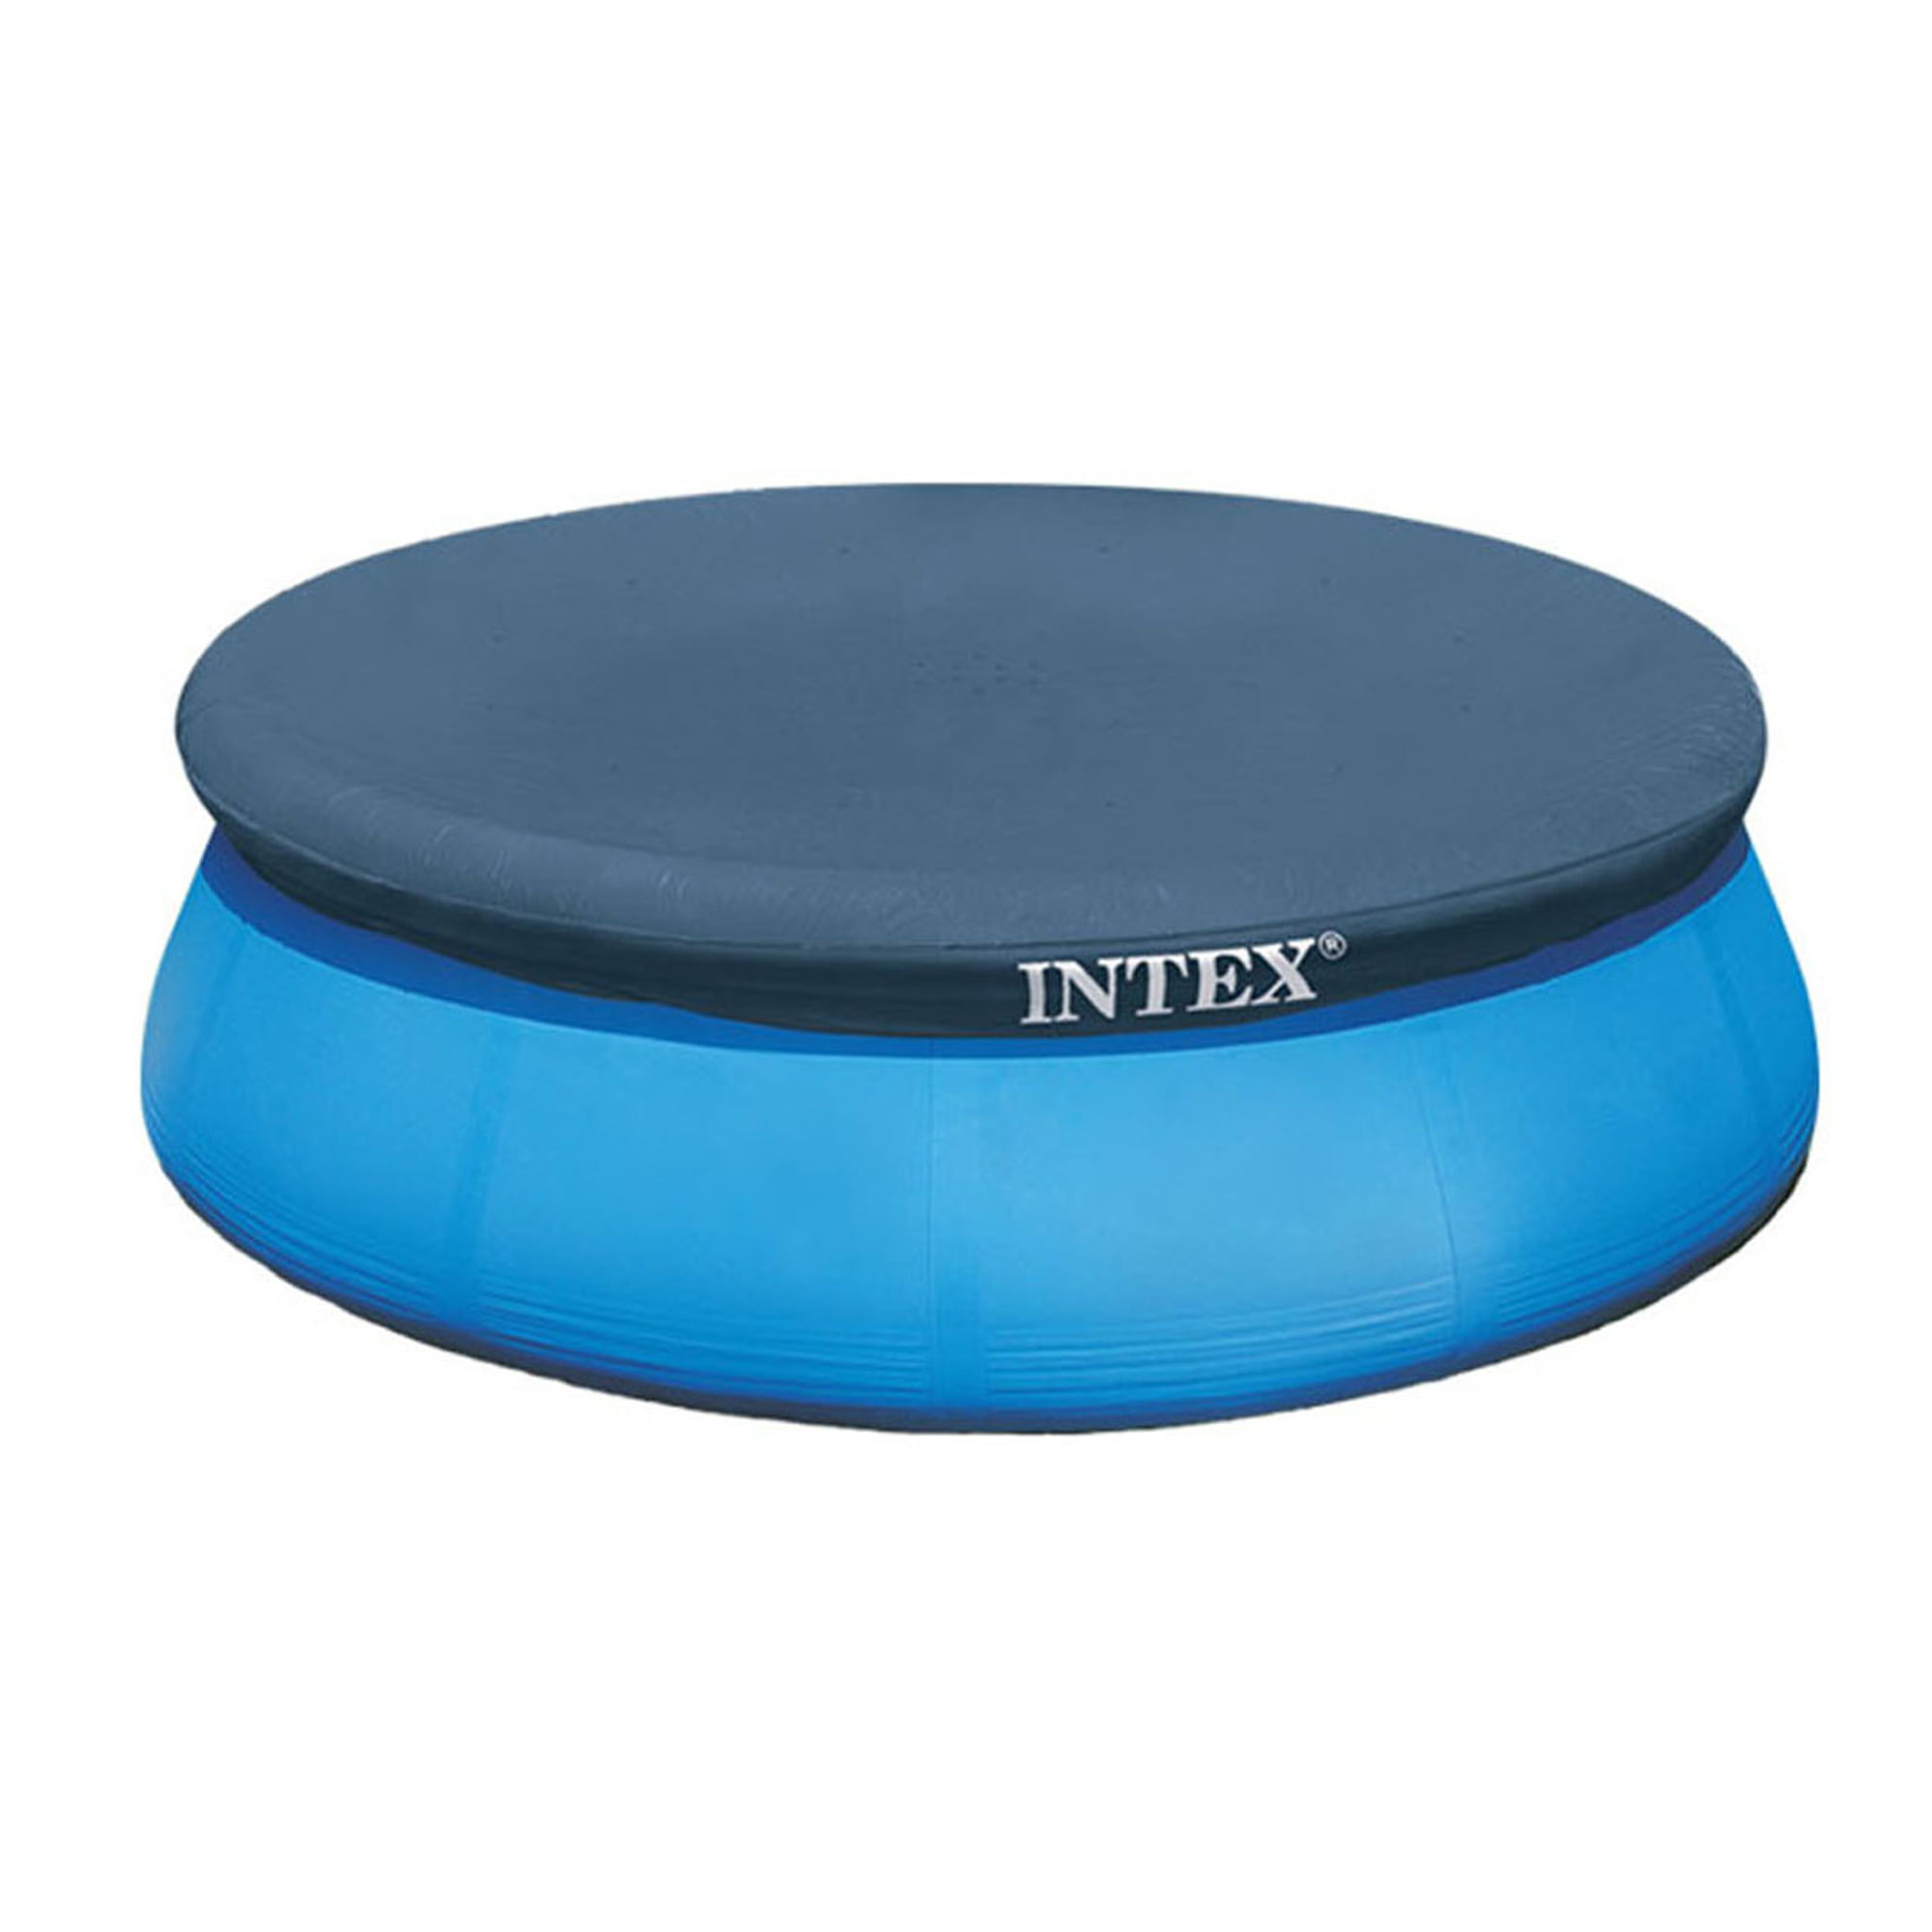 Intex Easy Set 8' x Round Swimming Pool with Protective Cover - Walmart.com